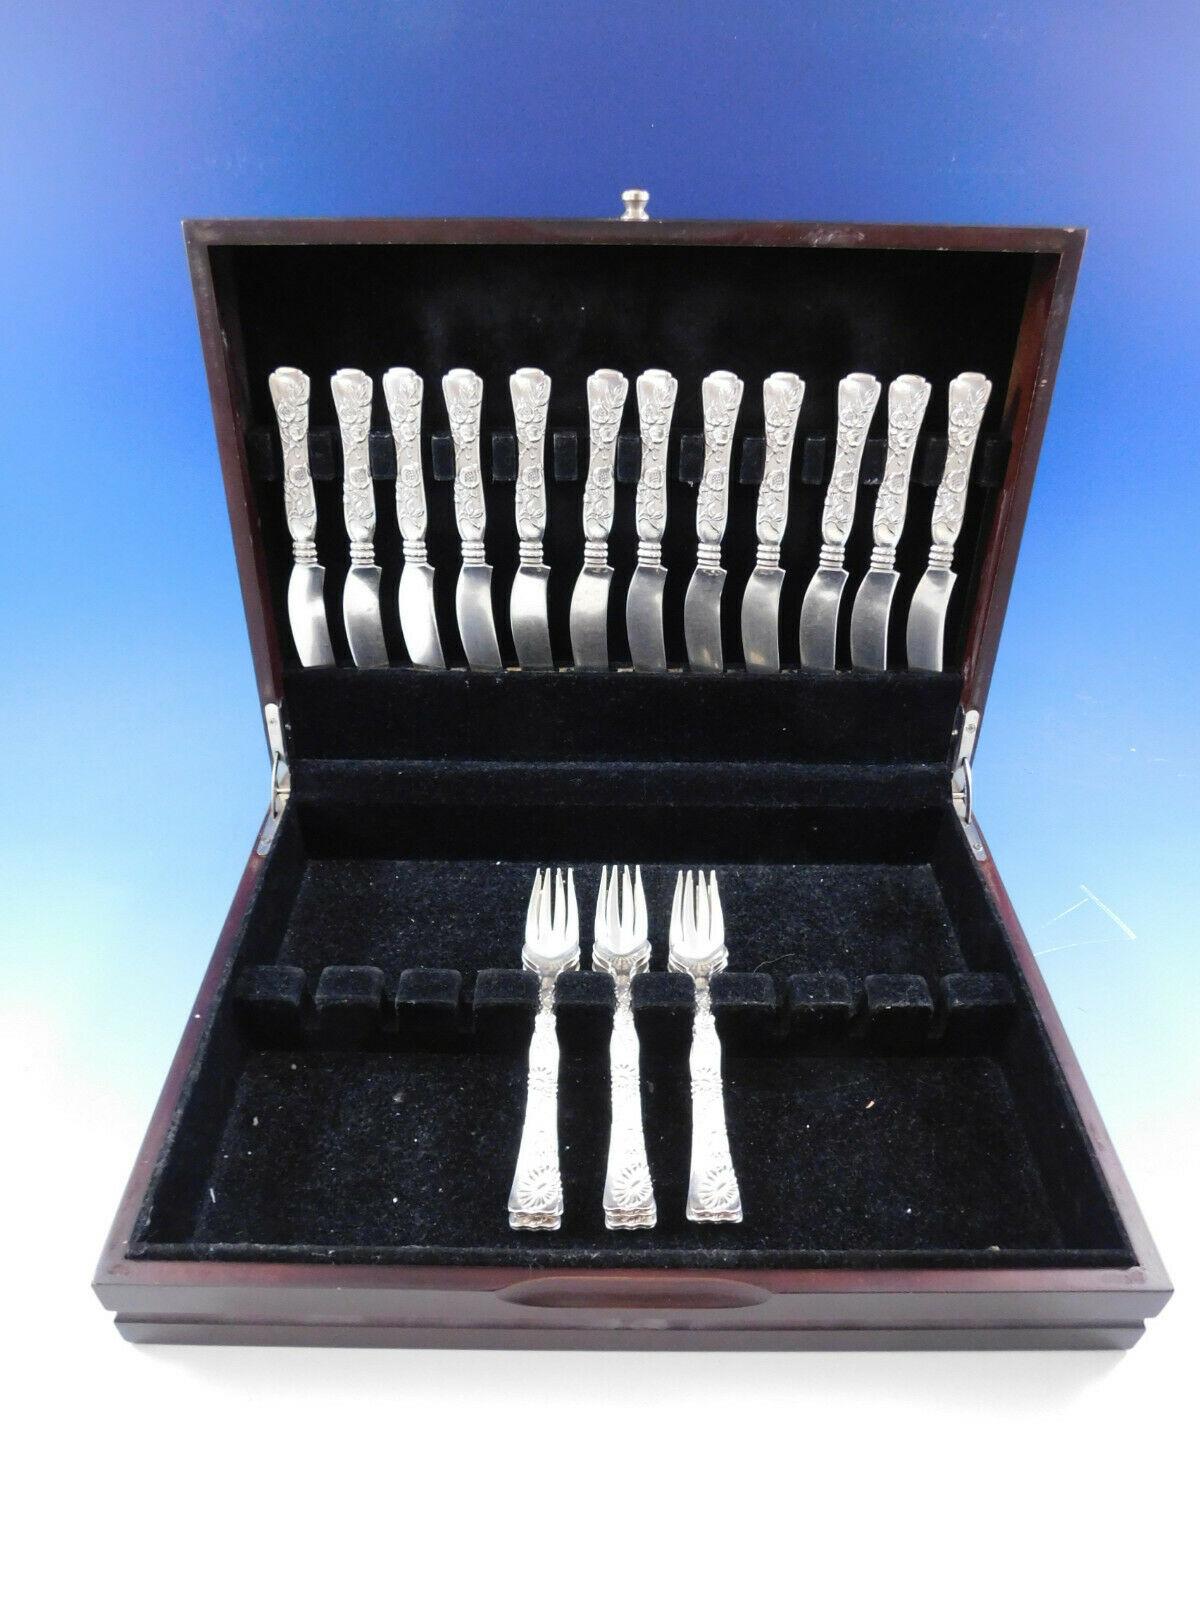 Vine by Tiffany and Co. sterling silver Individual Fish set, 24 pieces. This set includes:

12 fish knives, flat handle all-sterling, with pomegranate motif, 8